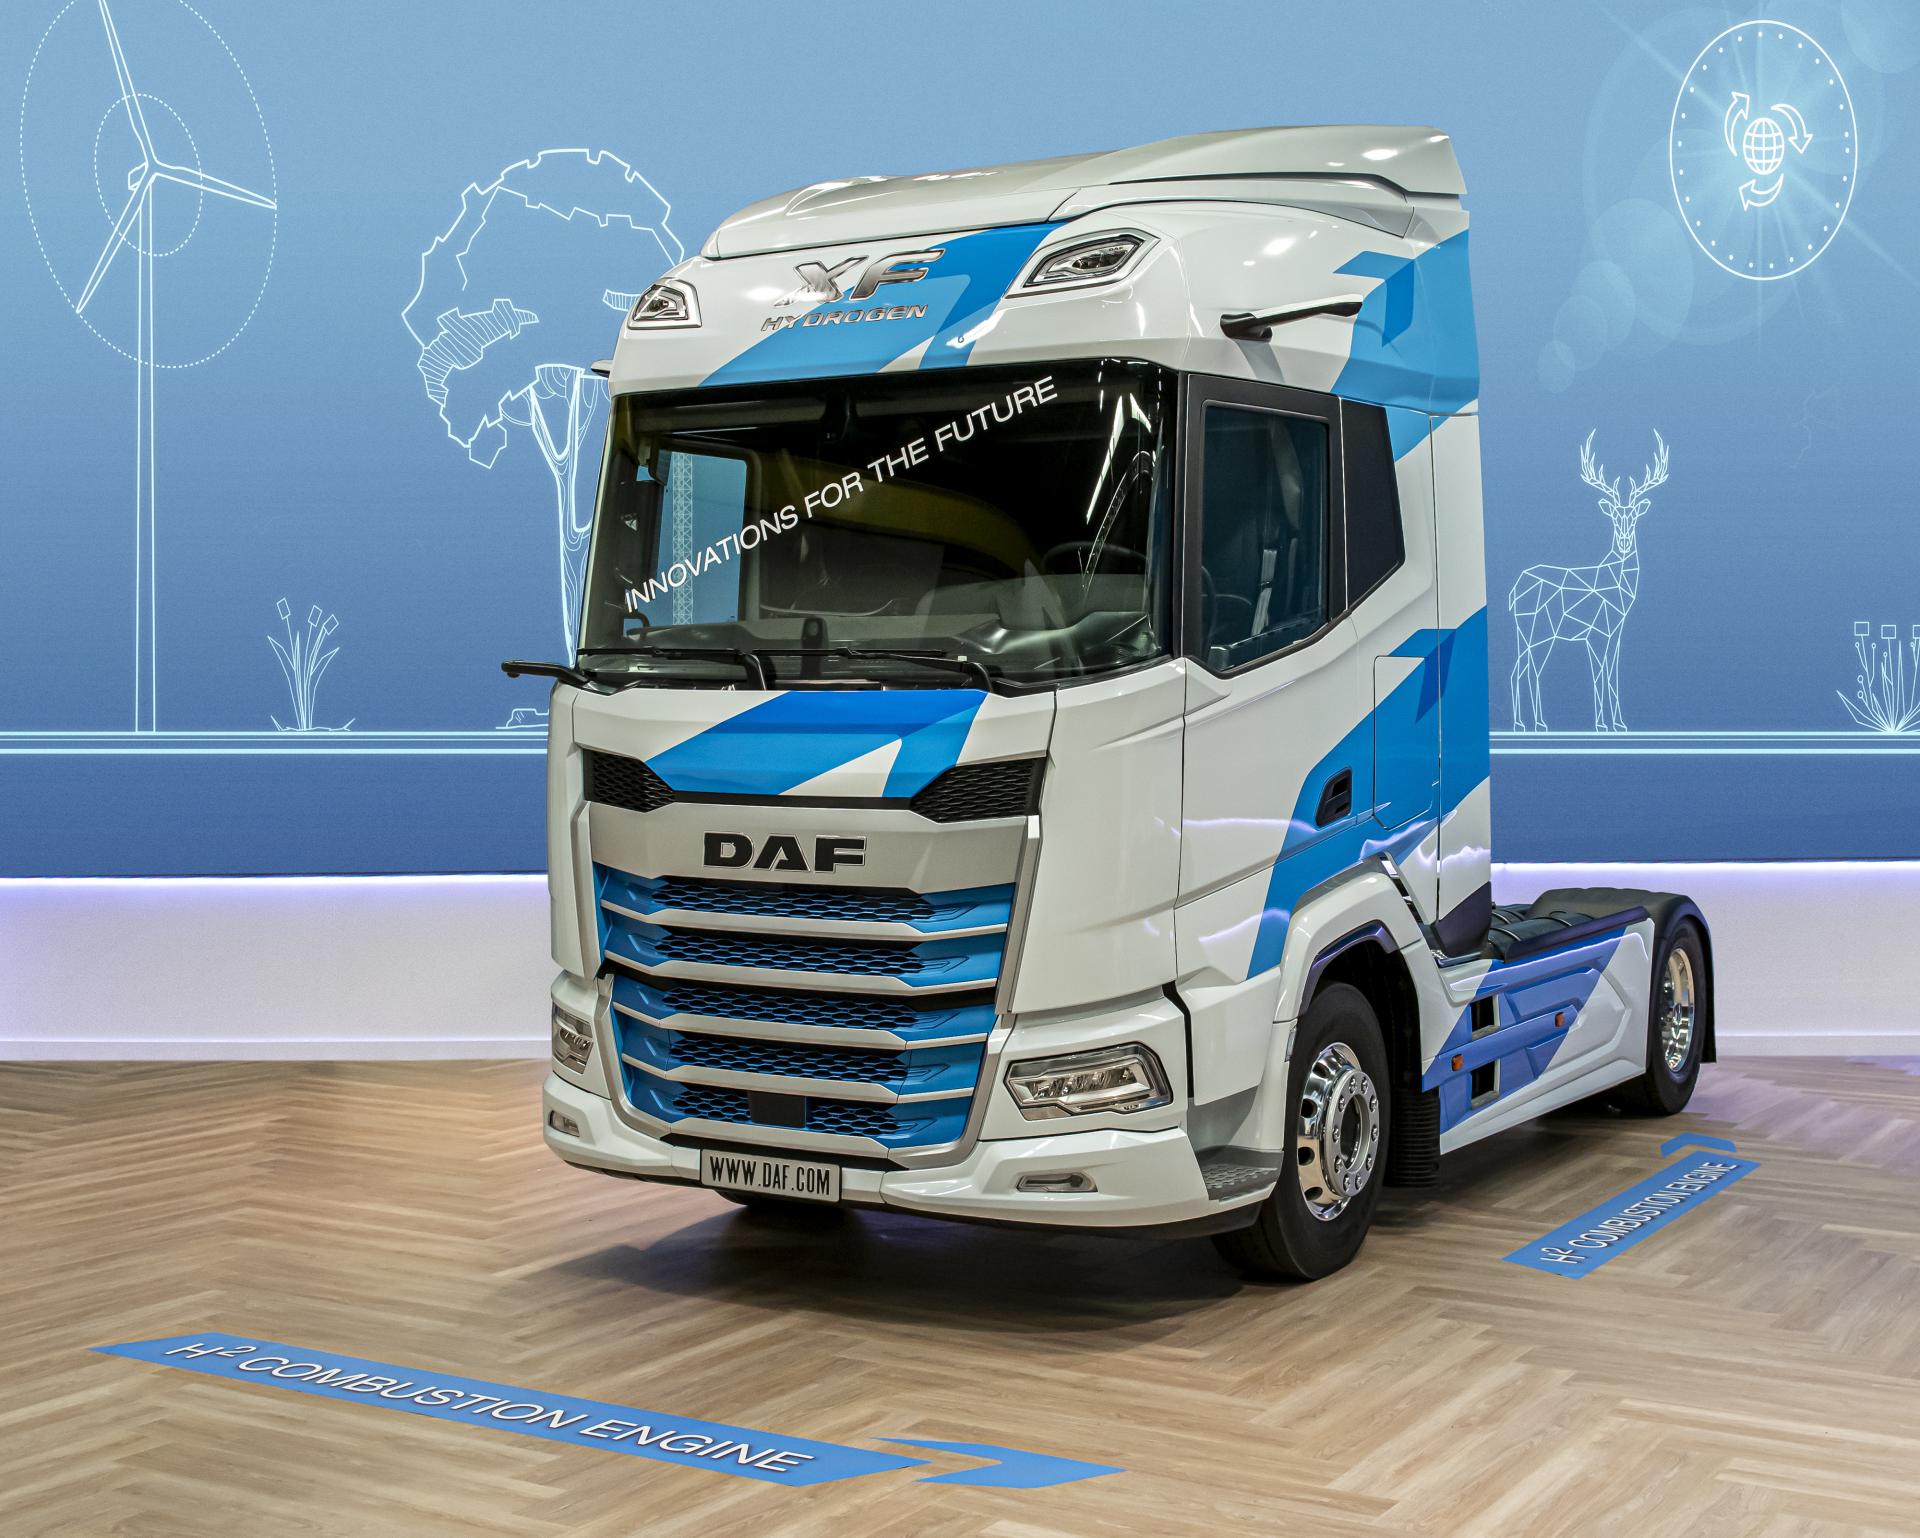 01 new generation daf xf prototype featuring hydrogen technology